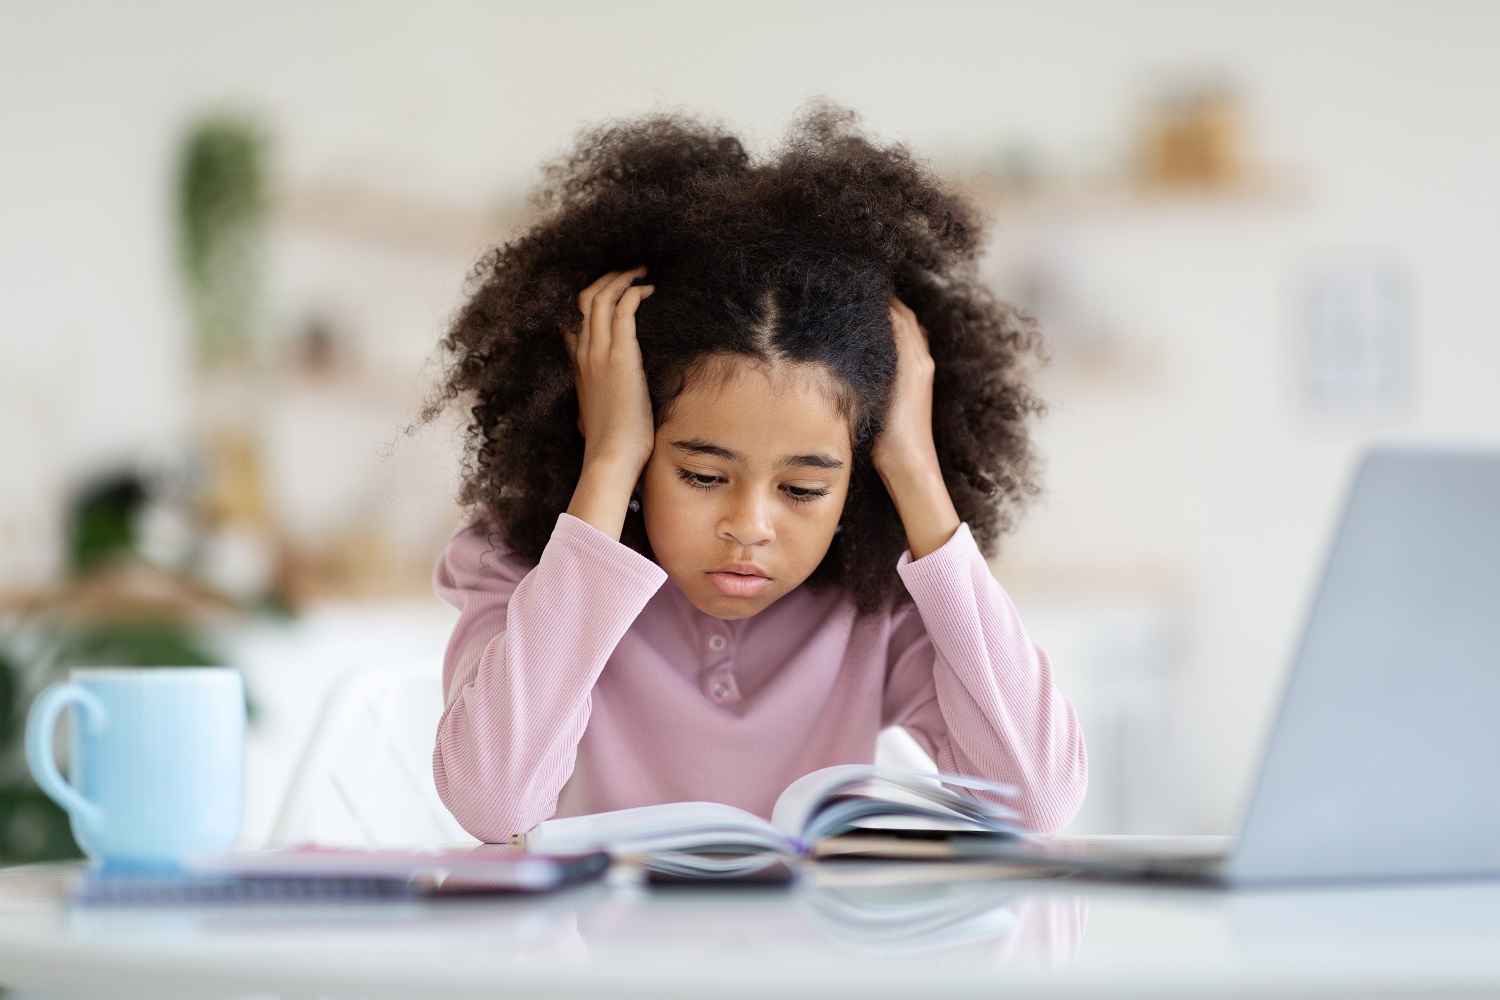 How to Tell if Your Child is Stressed or Anxious